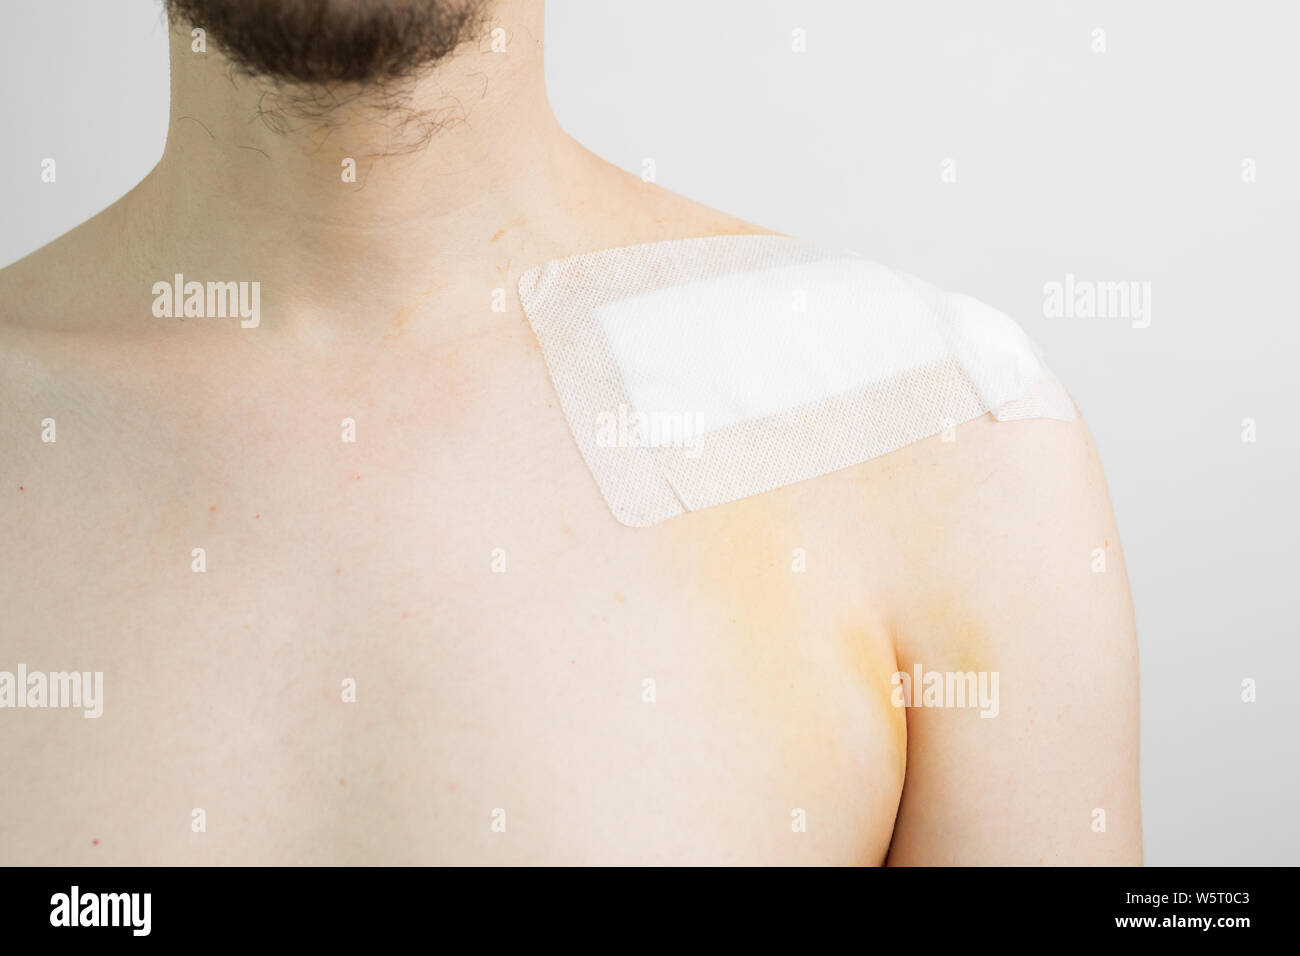 white caucasian male with a broken collarbone / clavicle / clavicula after surgery with a band aid after a bike crash Stock Photo